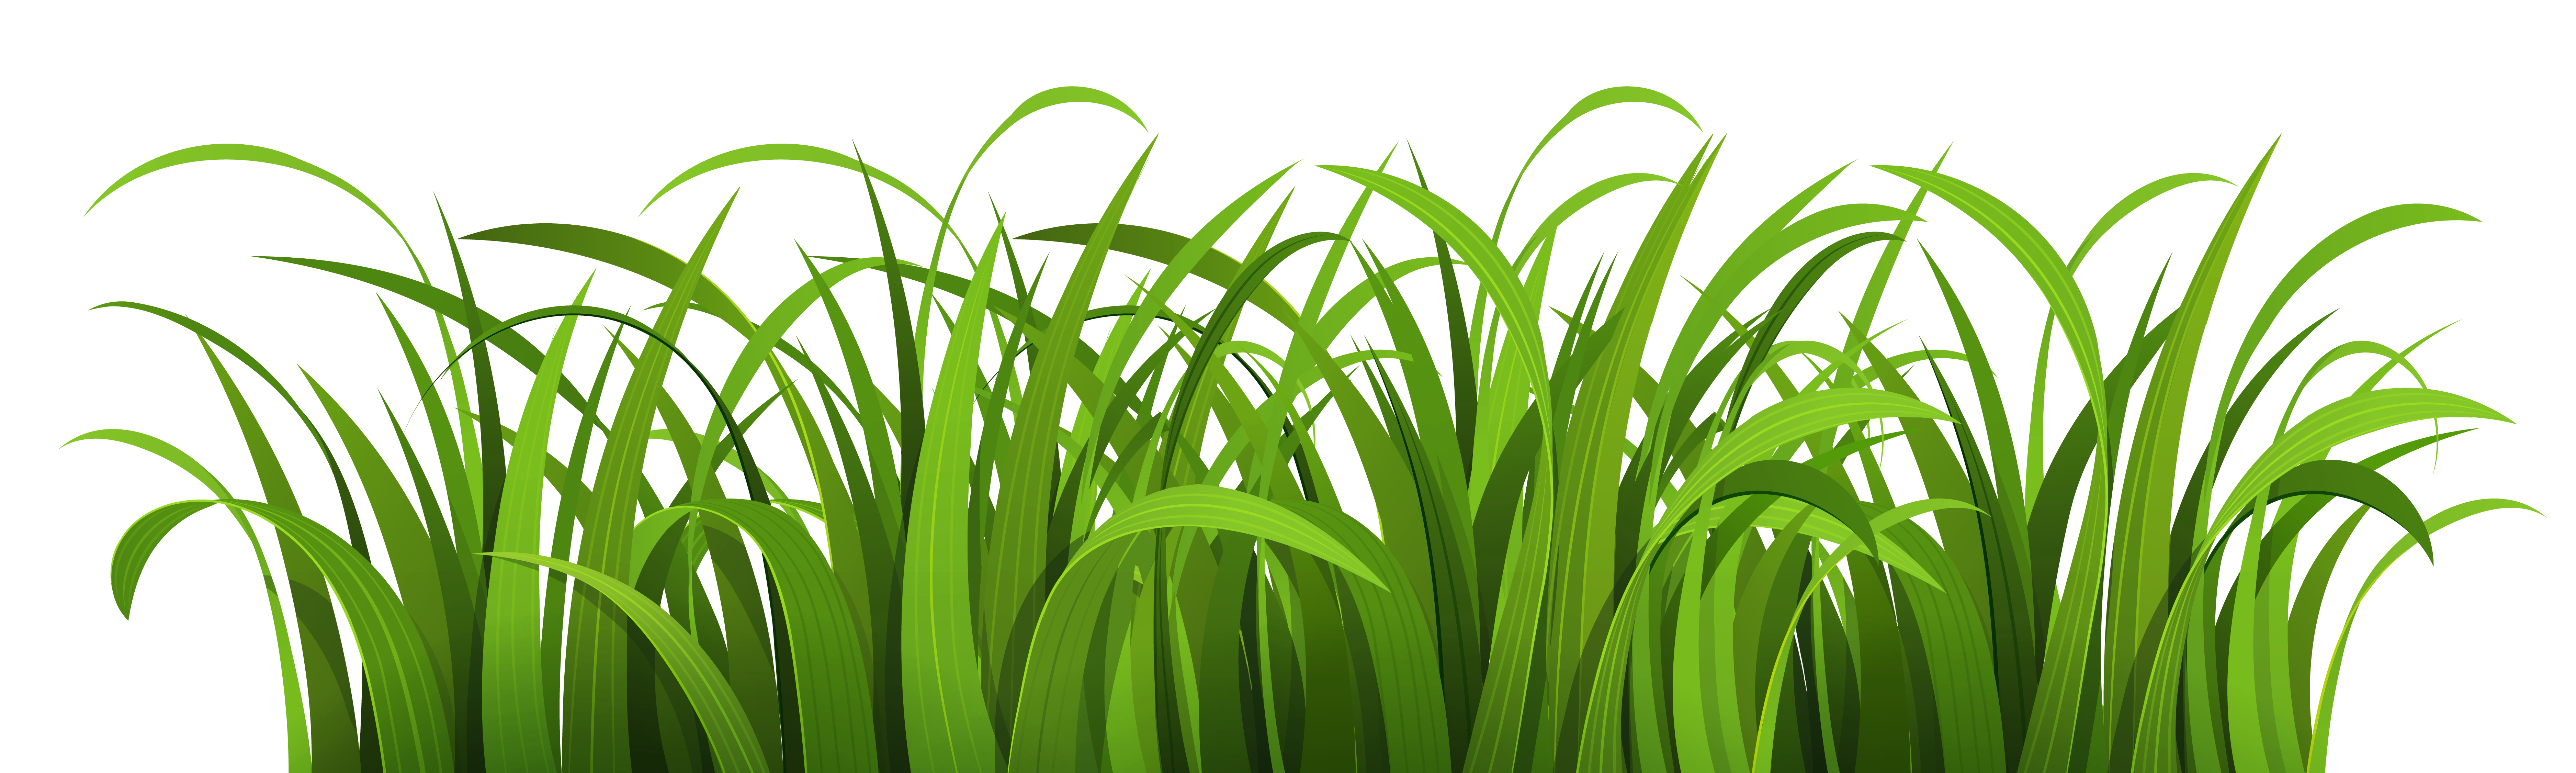 Grass clipart vector Grass vector Transparent FREE for download on WebStockReview 2020